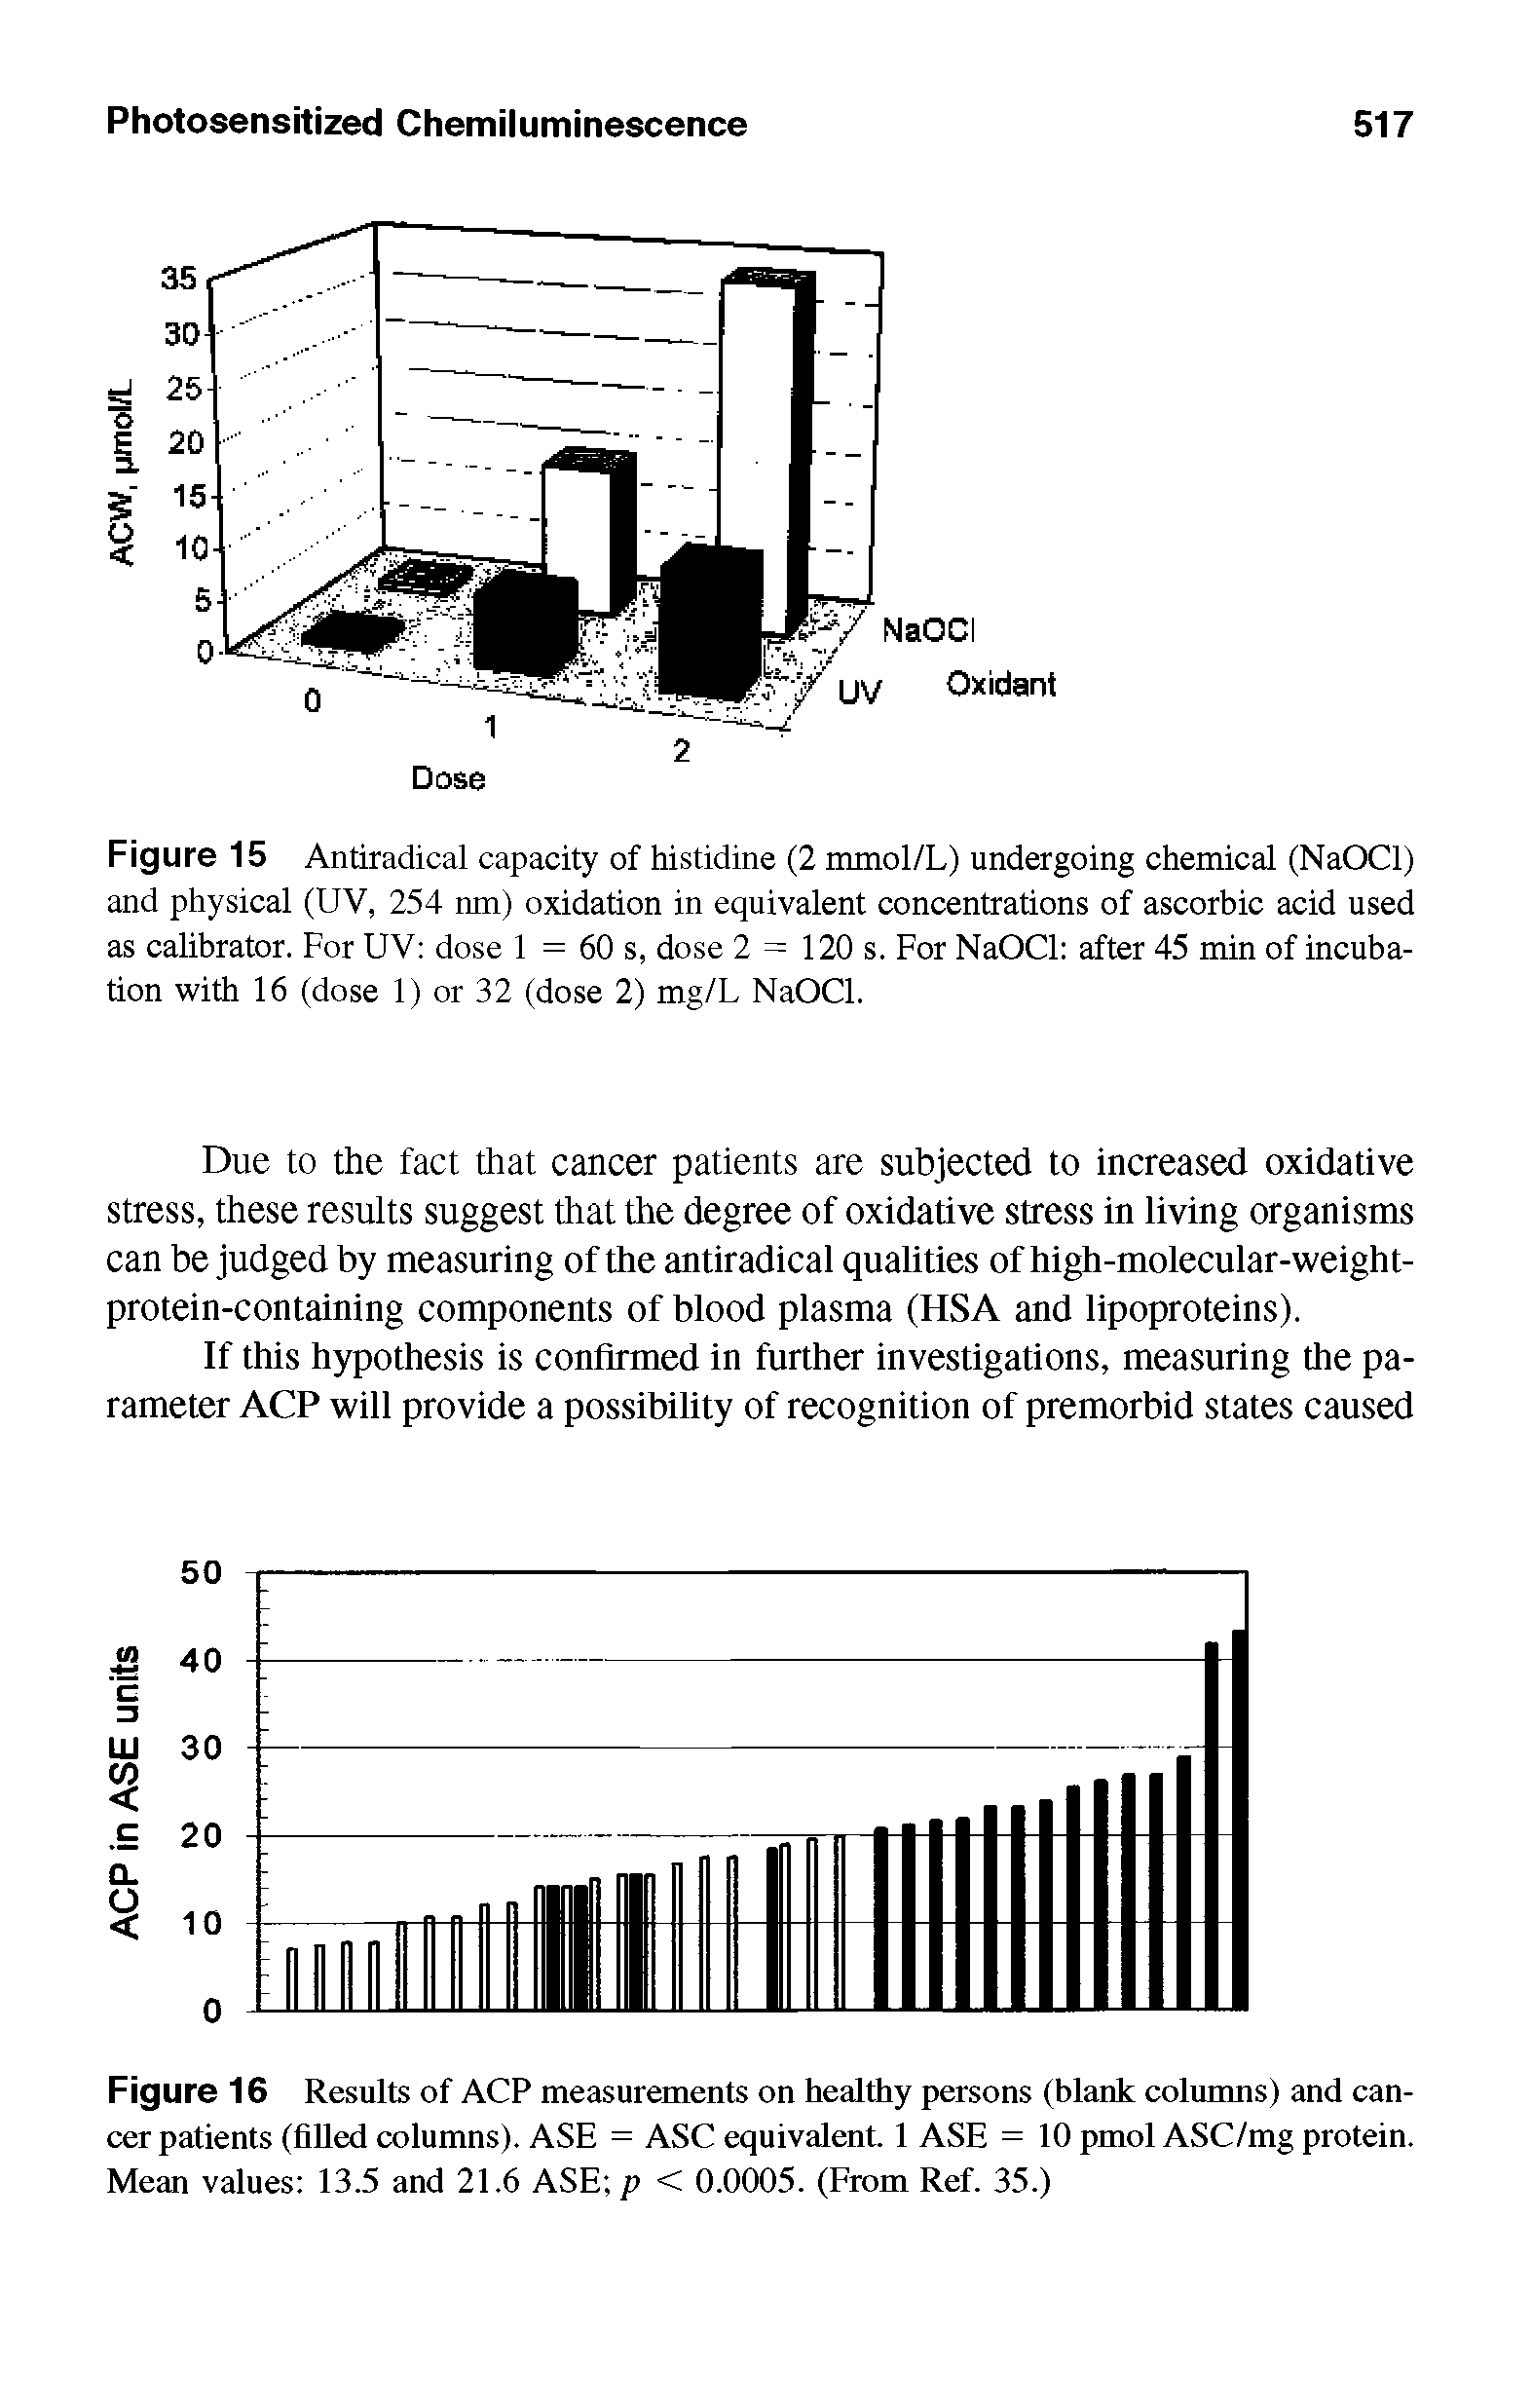 Figure 15 Antiradical capacity of histidine (2 mmol/L) undergoing chemical (NaOCI) and physical (UV, 254 nm) oxidation in equivalent concentrations of ascorbic acid used as calibrator. For UV dose 1 = 60 s, dose 2 = 120 s. For NaOCI after 45 min of incubation with 16 (dose 1) or 32 (dose 2) mg/L NaOCI.